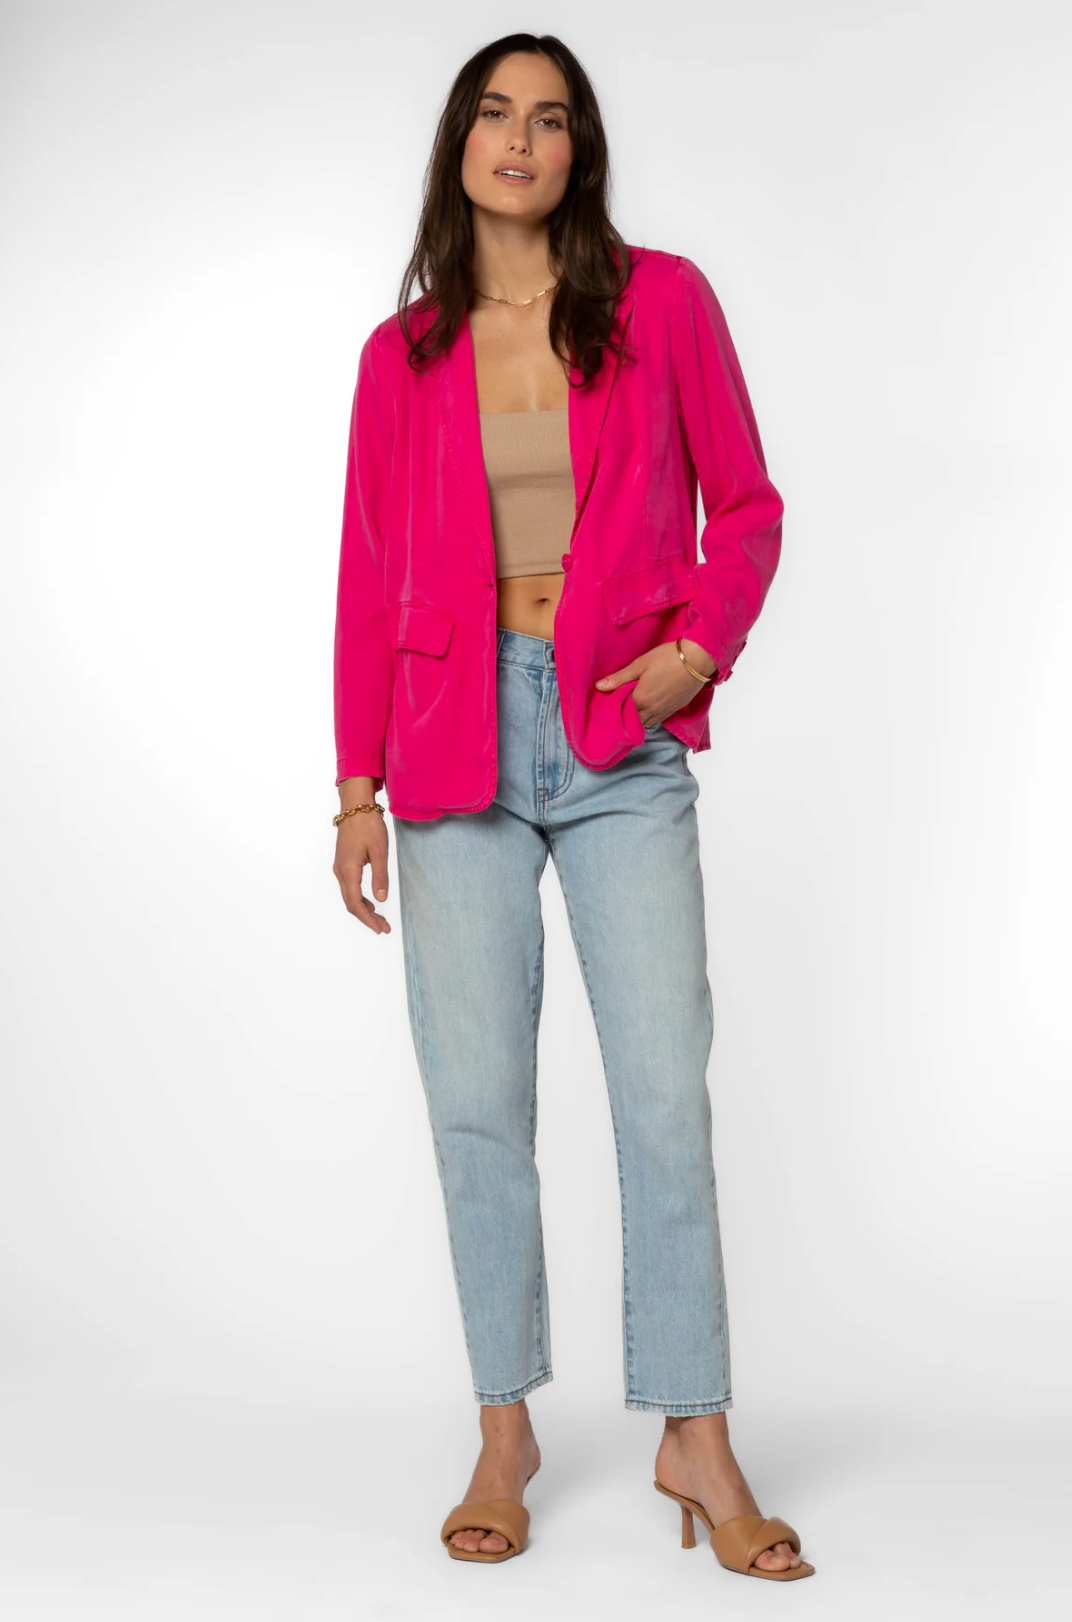 patty tencel blazer in pink, styled with jeans